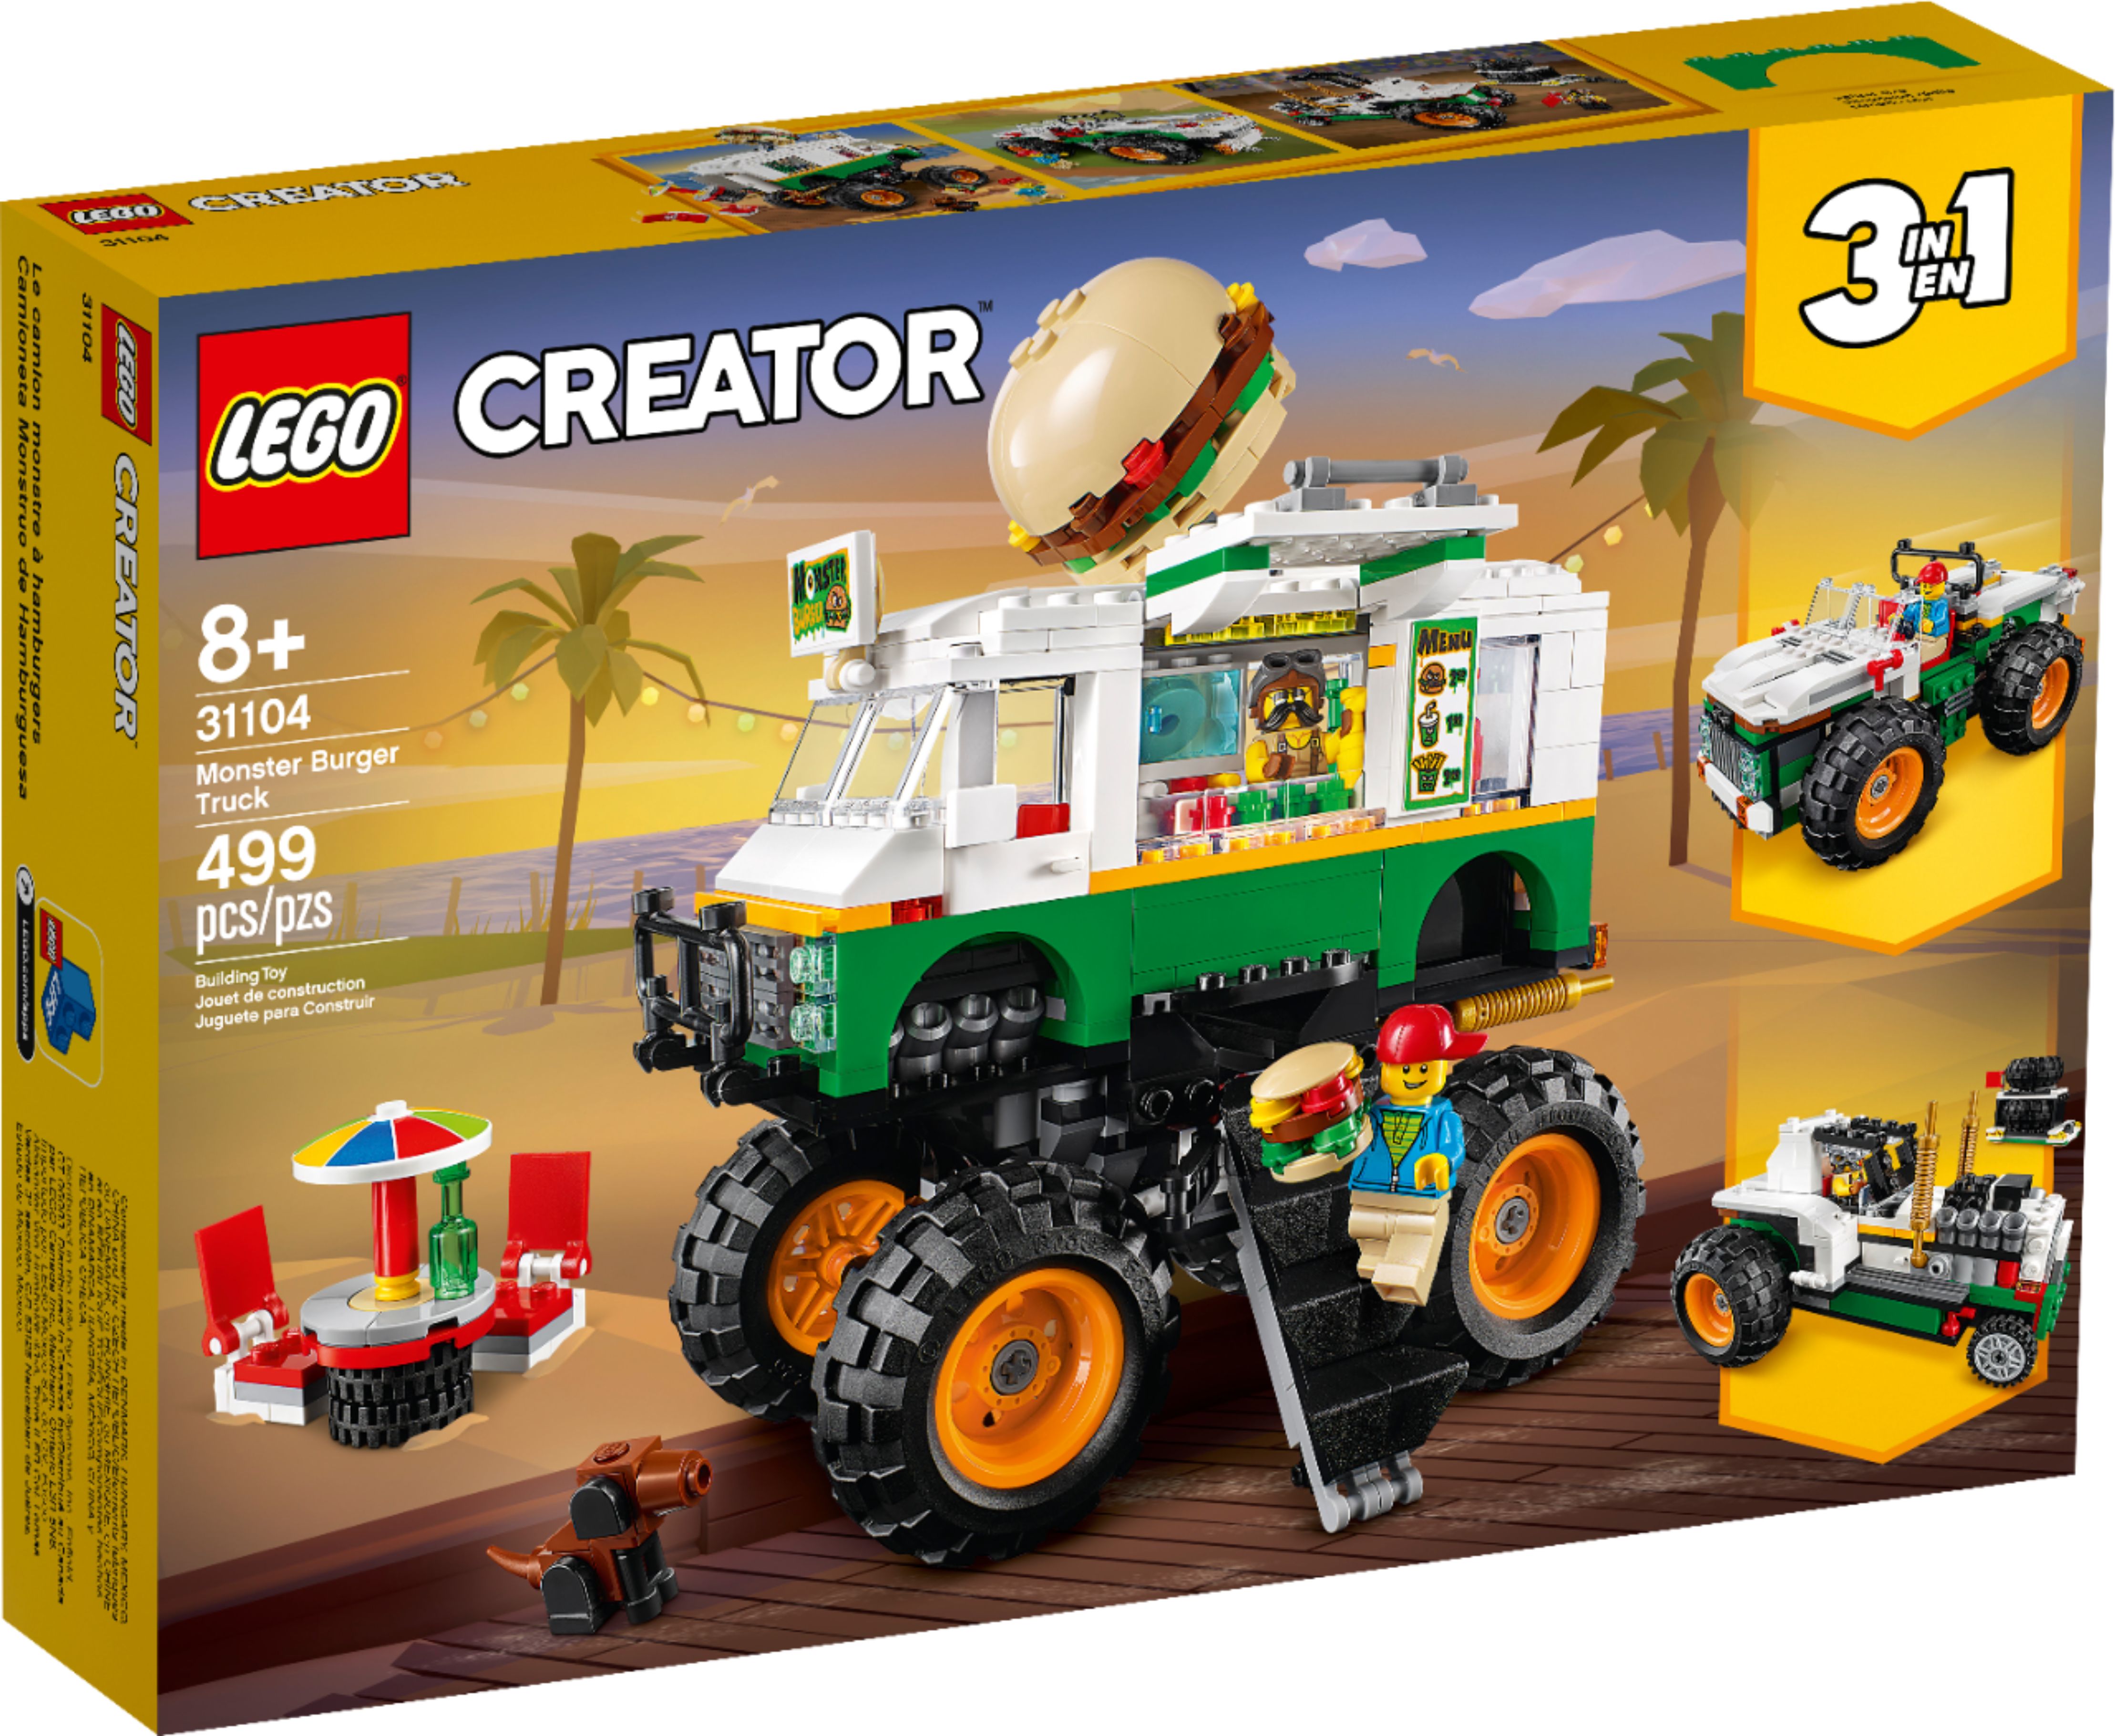 Angle View: LEGO - Creator 3-in-1 Monster Burger Truck 31104